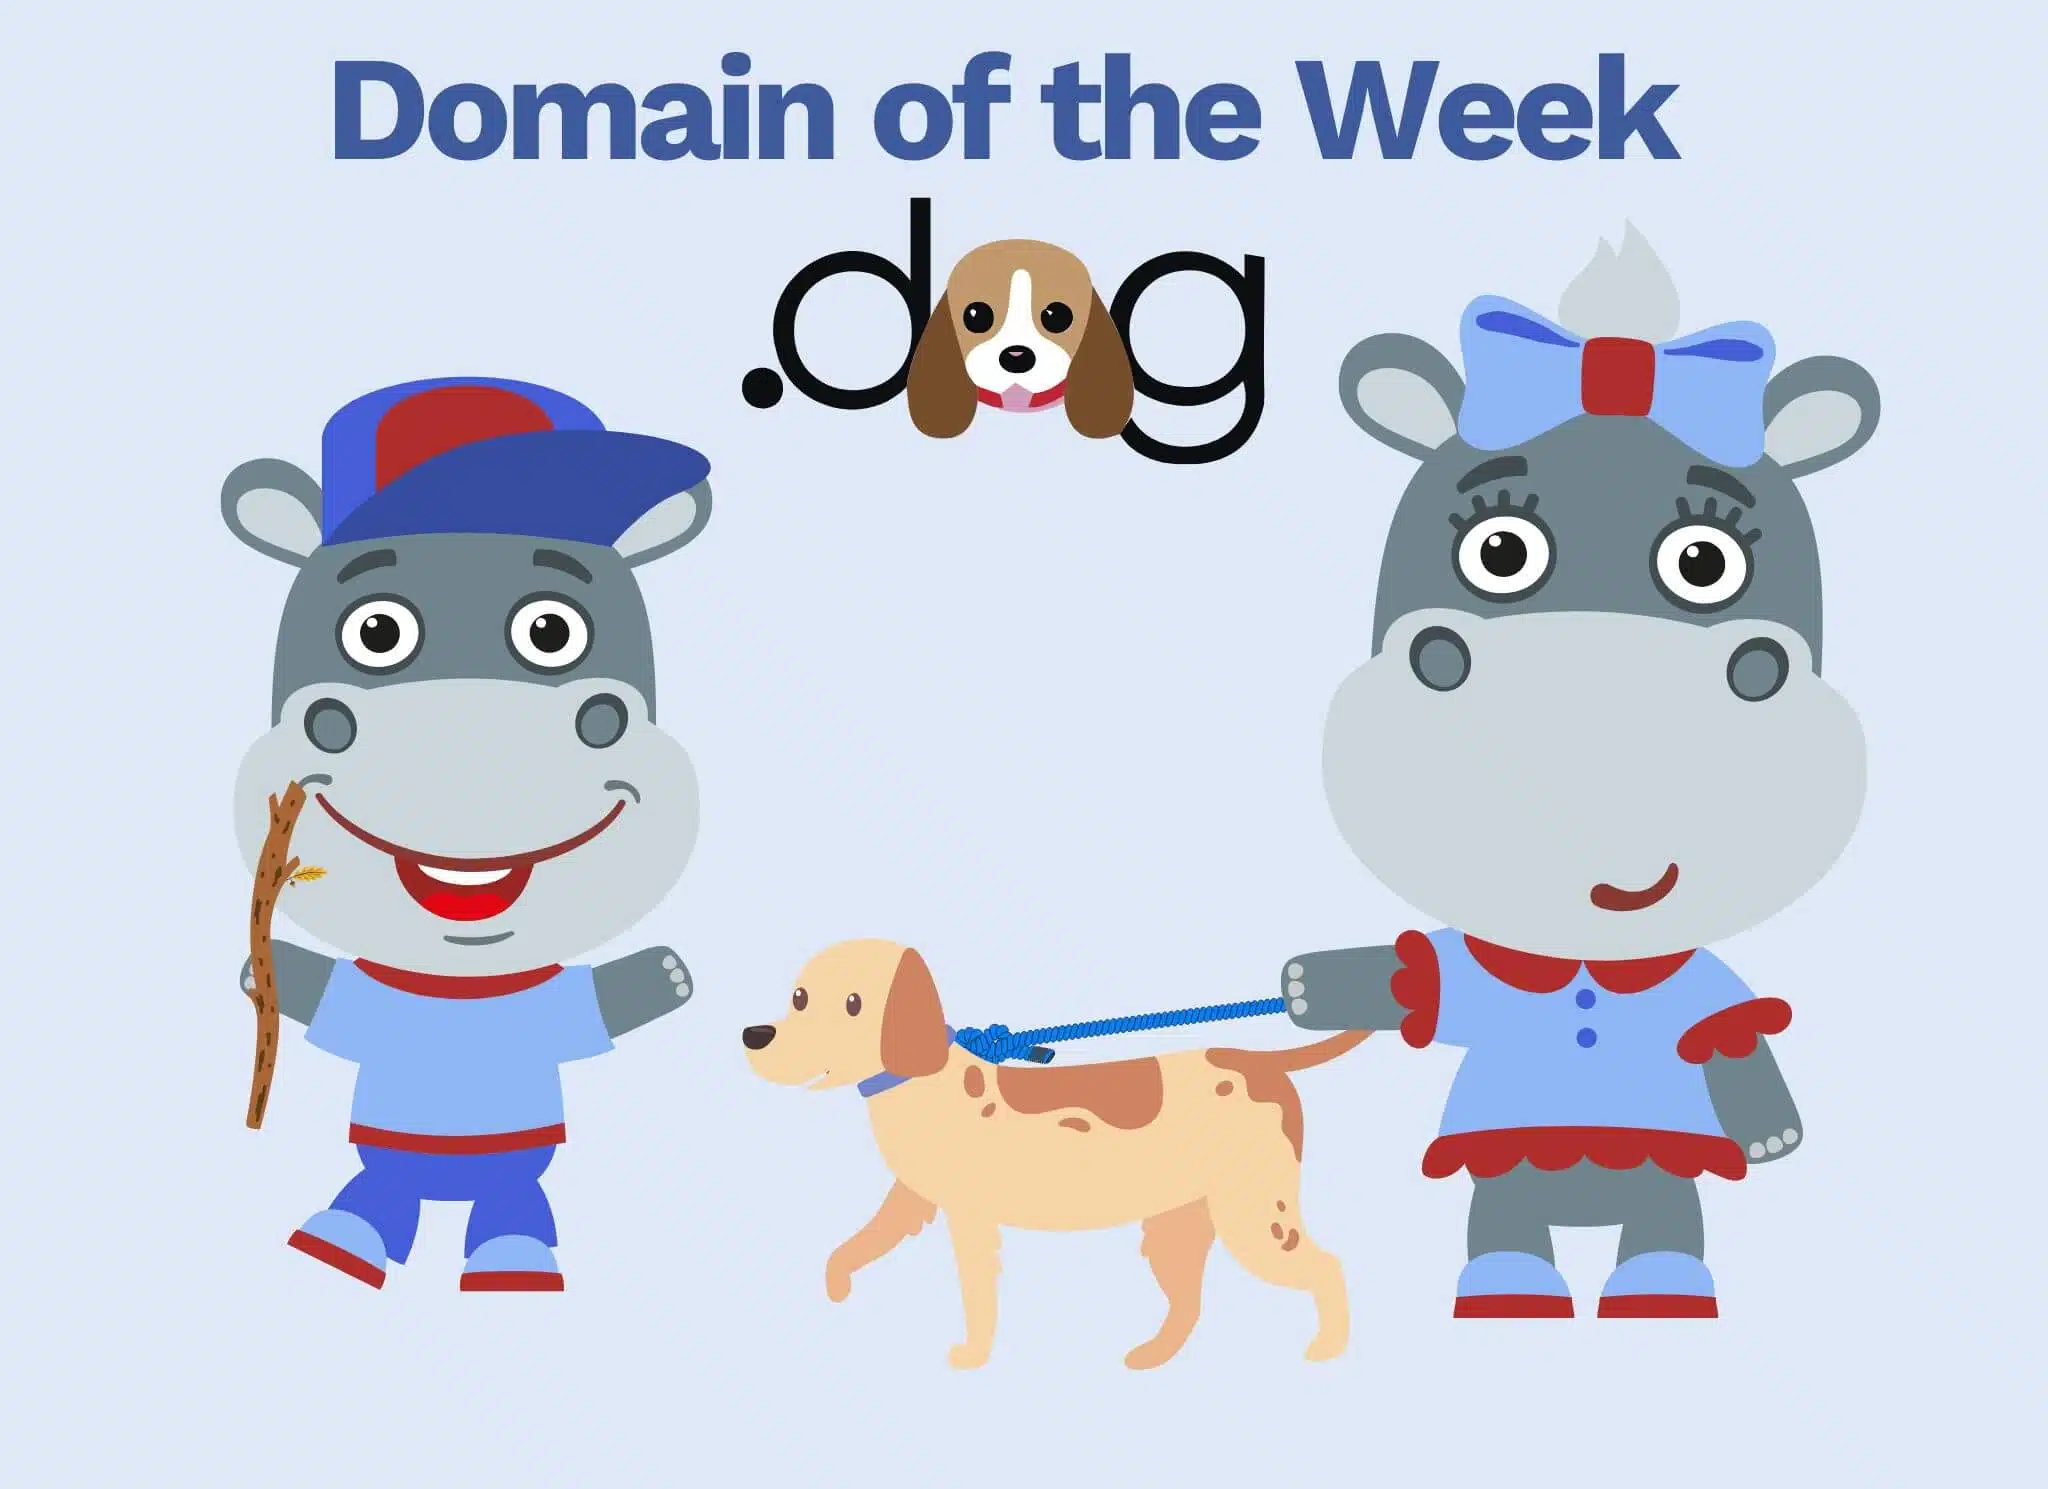 Domain of the Week. A .dog domain from Hipposerve